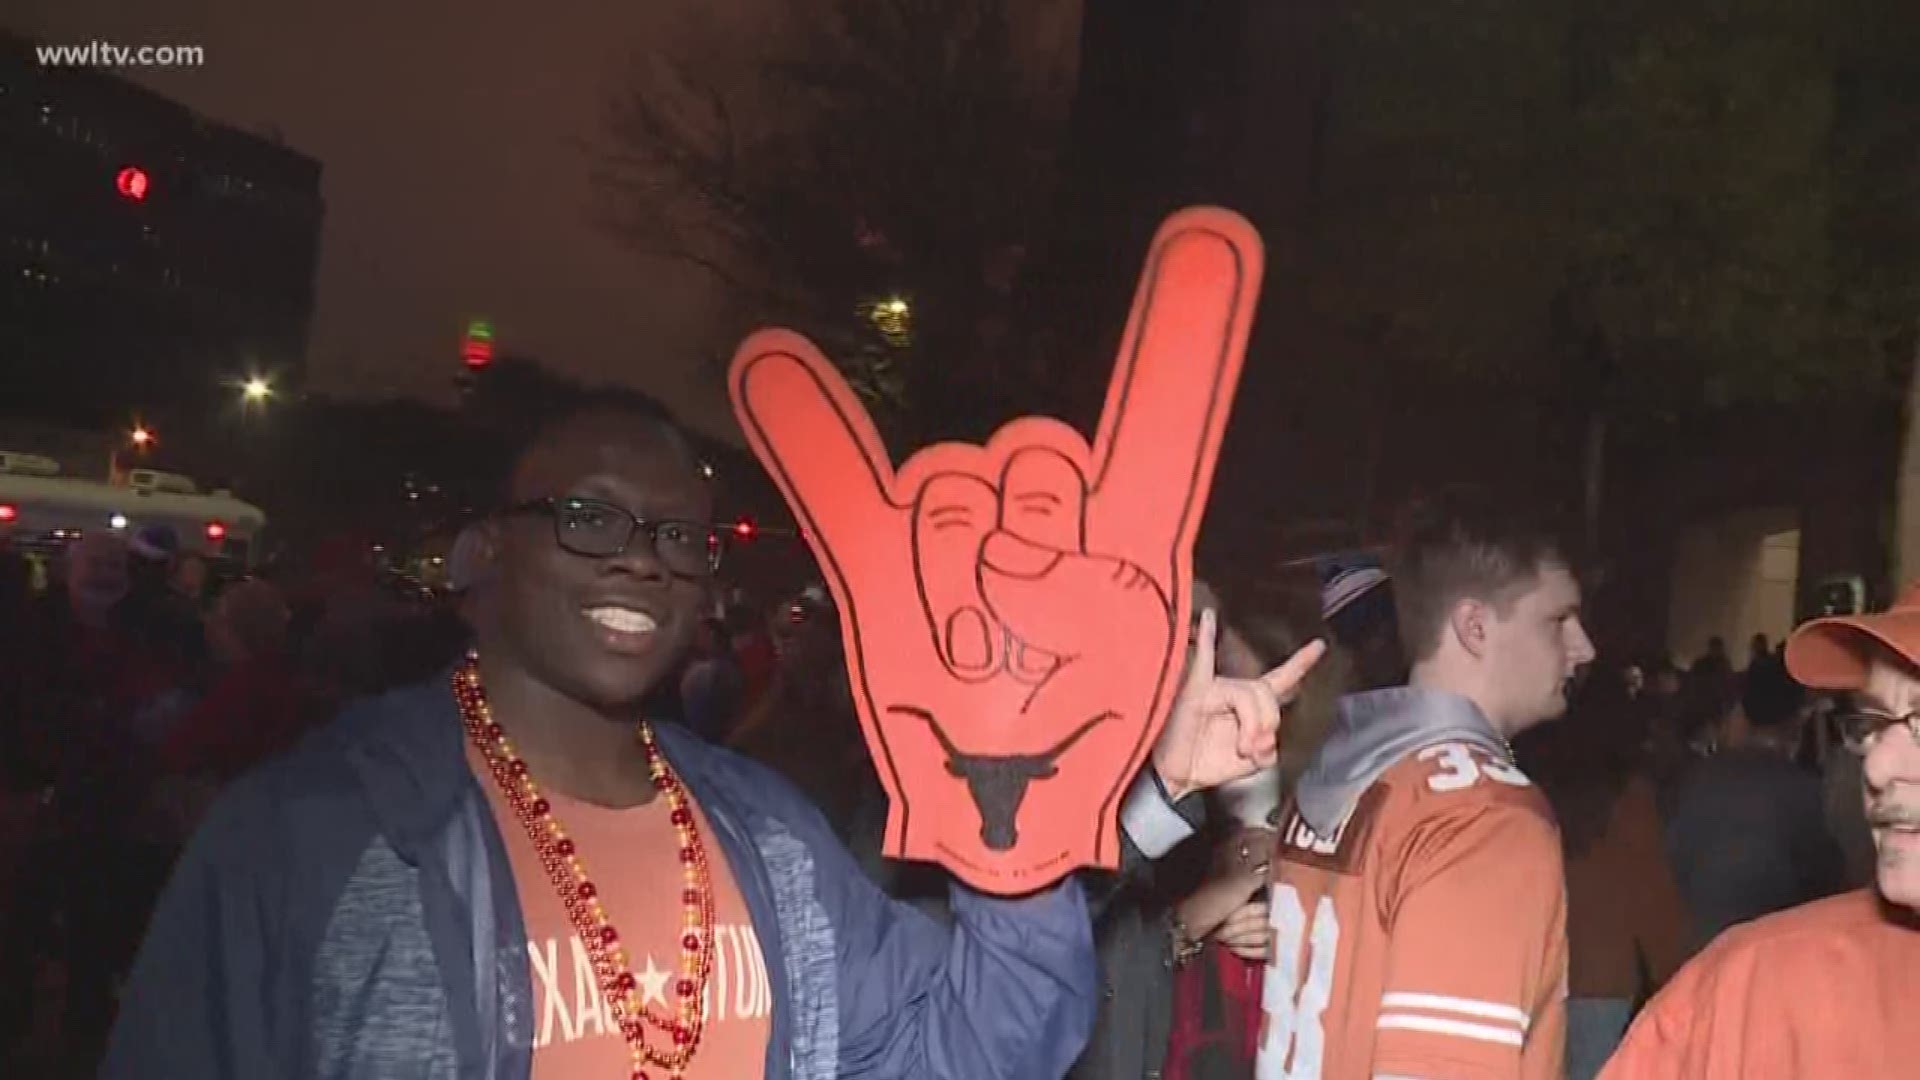 Regardless of the final score, fans from both schools were excited to ring in the new year at the Allstate Sugar Bowl.